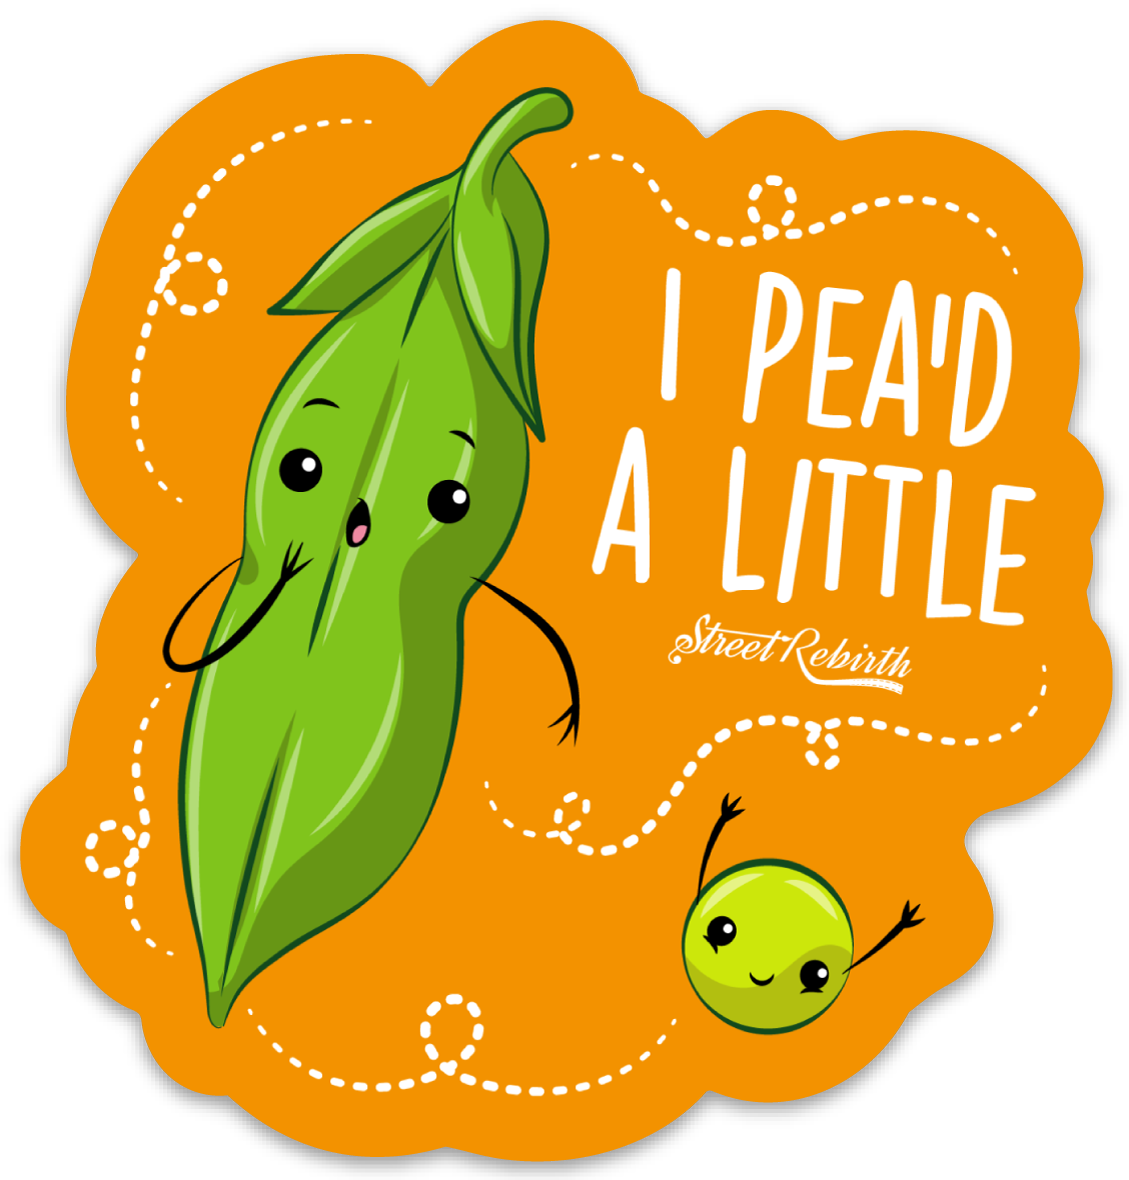 I Pea'd a Little PUN STICKER – ONE 4 INCH WATER PROOF VINYL STICKER – FOR HYDRO FLASK, SKATEBOARD, LAPTOP, PLANNER, CAR, COLLECTING, GIFTING